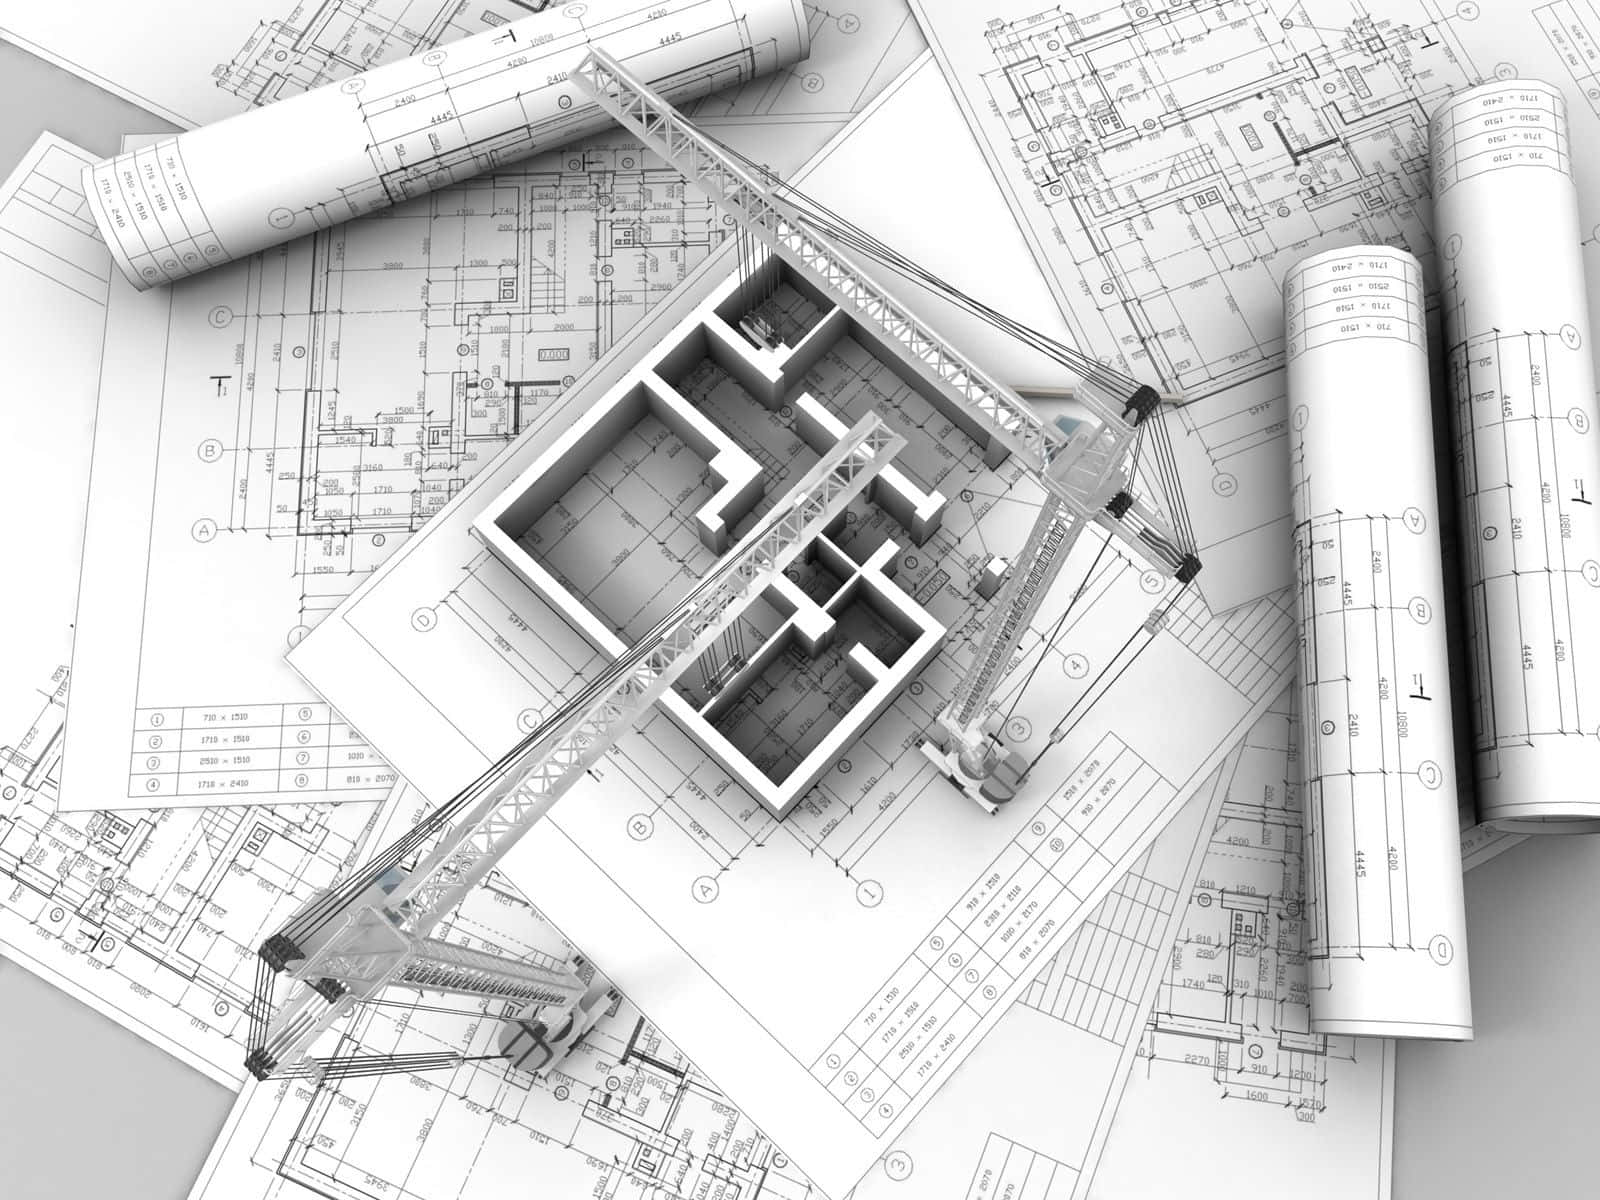 Architectural Plans And Drawings On A White Background